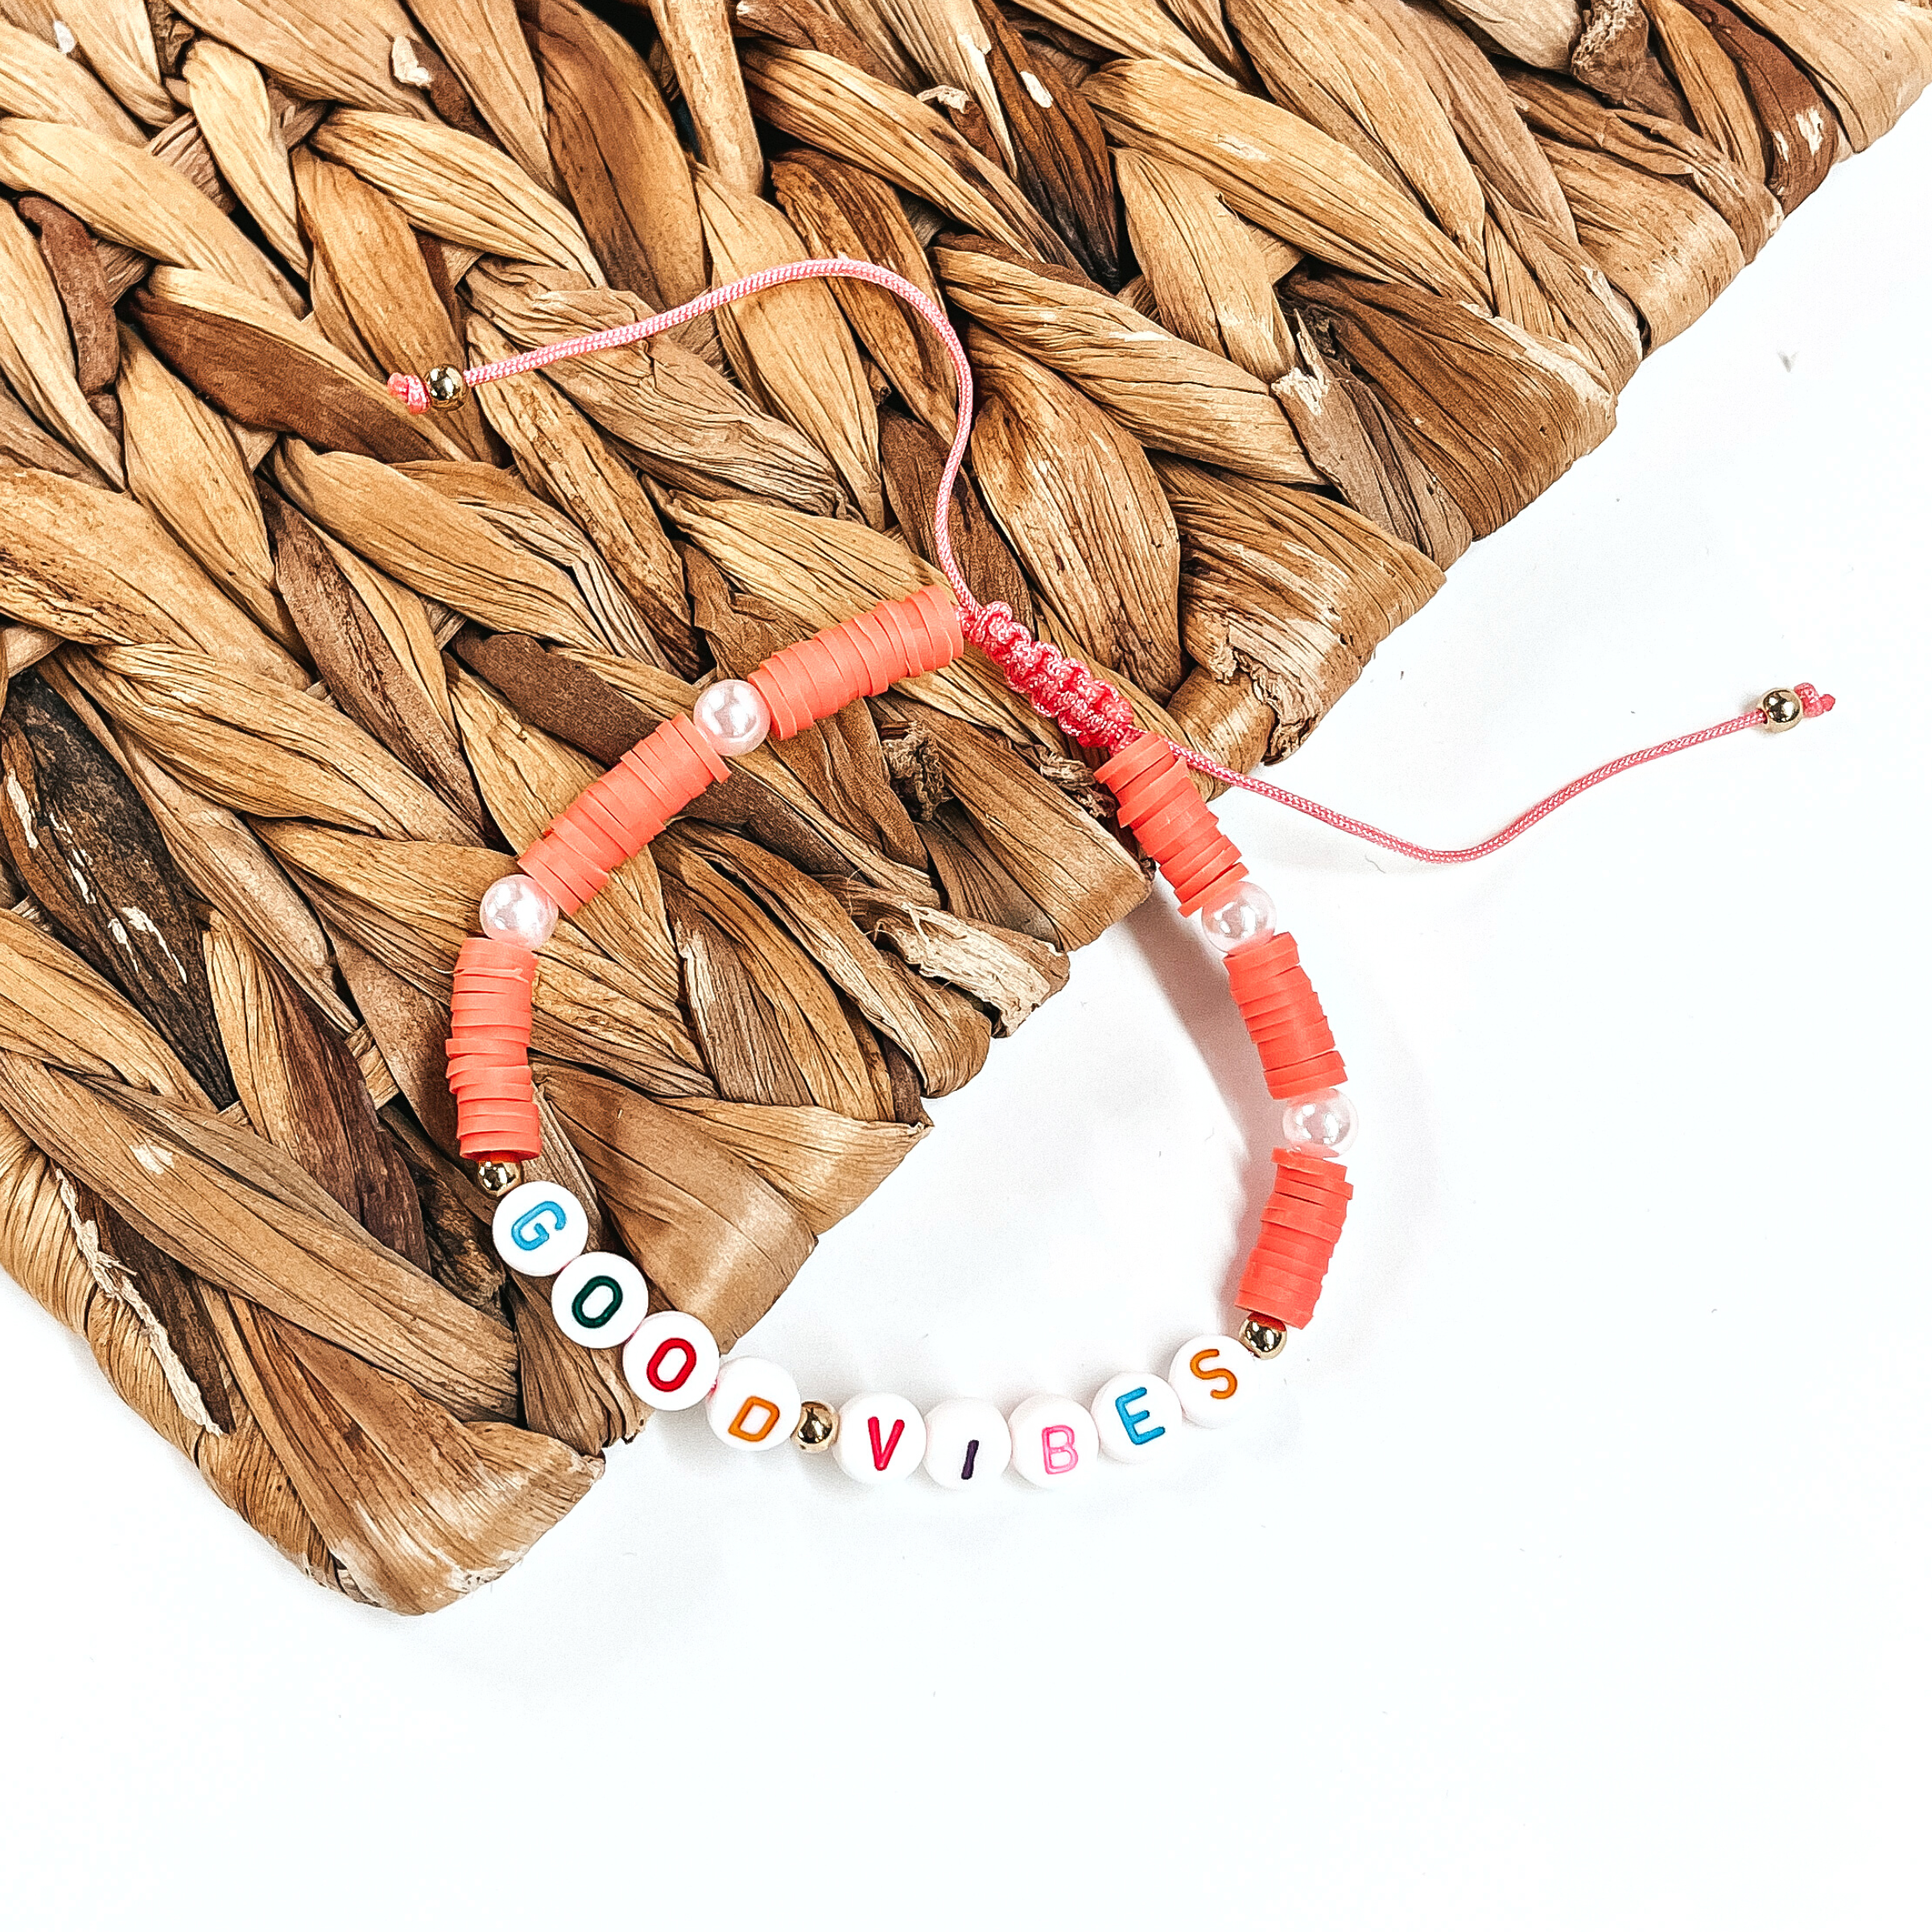 This is a disk beaded bracelet in coral that says, Good Vibes in  different colors. There are pearl spacers.  This bracelet is laying partly on a woven slate and on a white background.